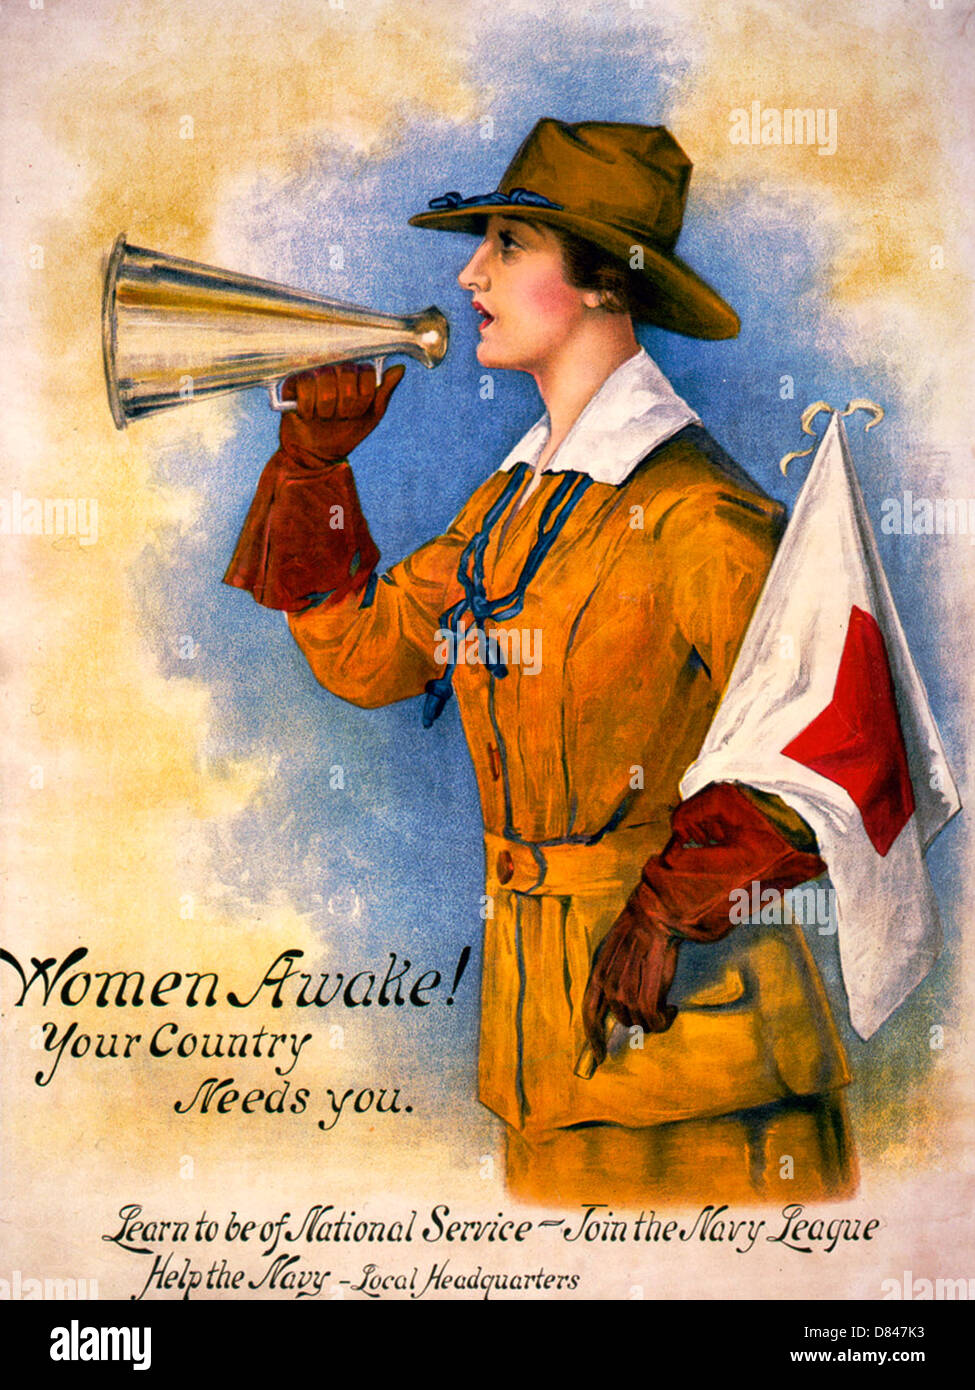 Women awake!  Your country needs you - Woman in uniform holding megaphone and flag. 1916 Poster Stock Photo